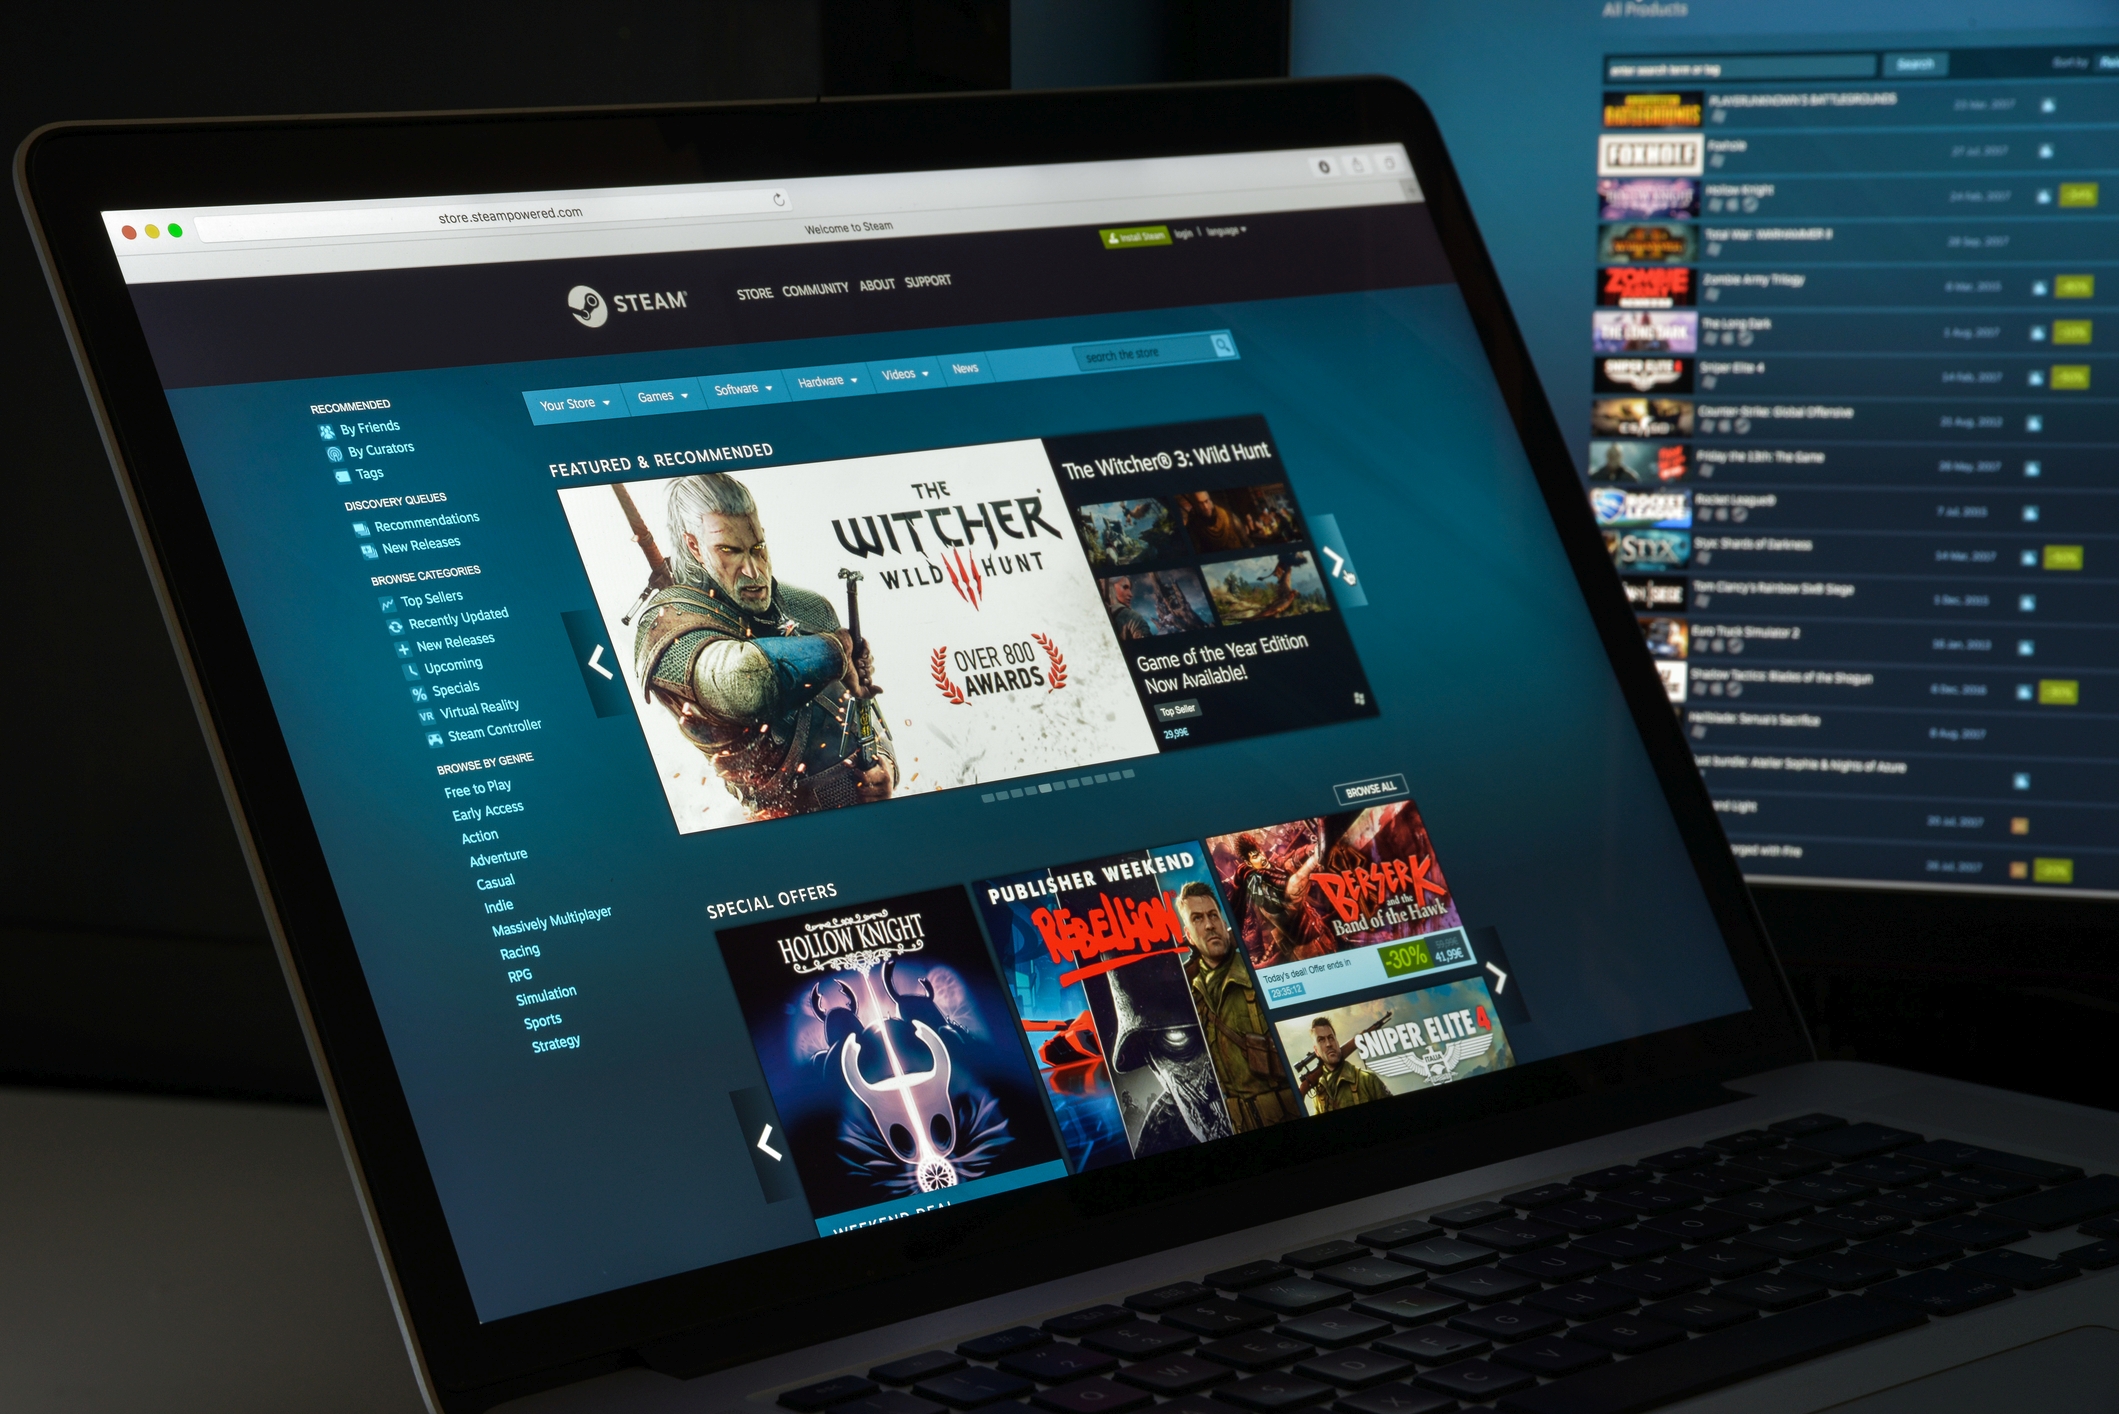 Steam Store, commercial centerpiece of the program